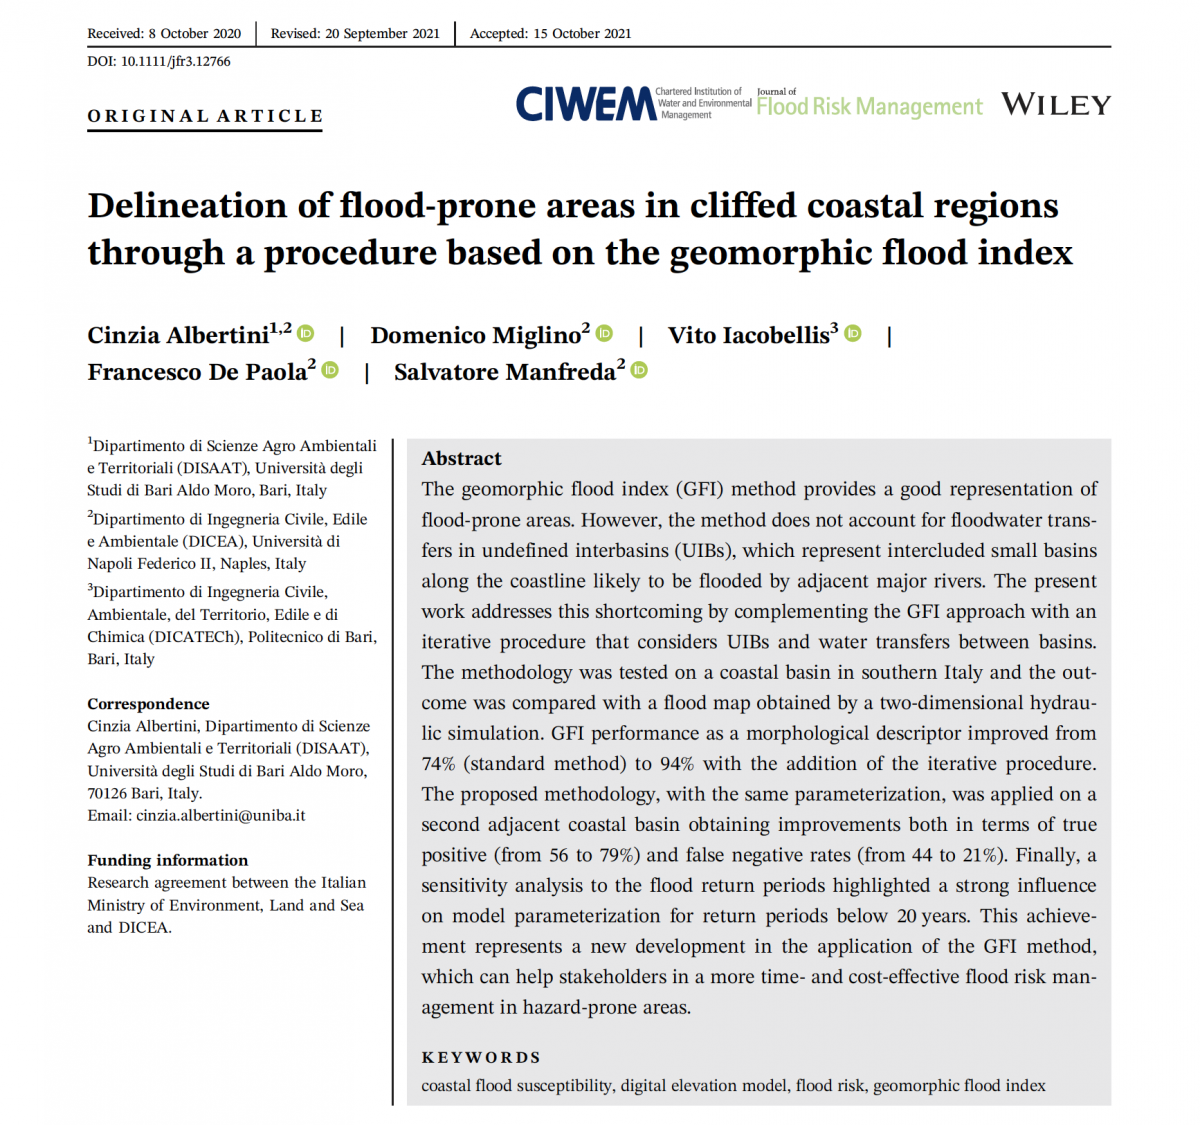 Delineation of flood-prone areas in cliffed coastal regions through a procedure based on the geomorphic flood index